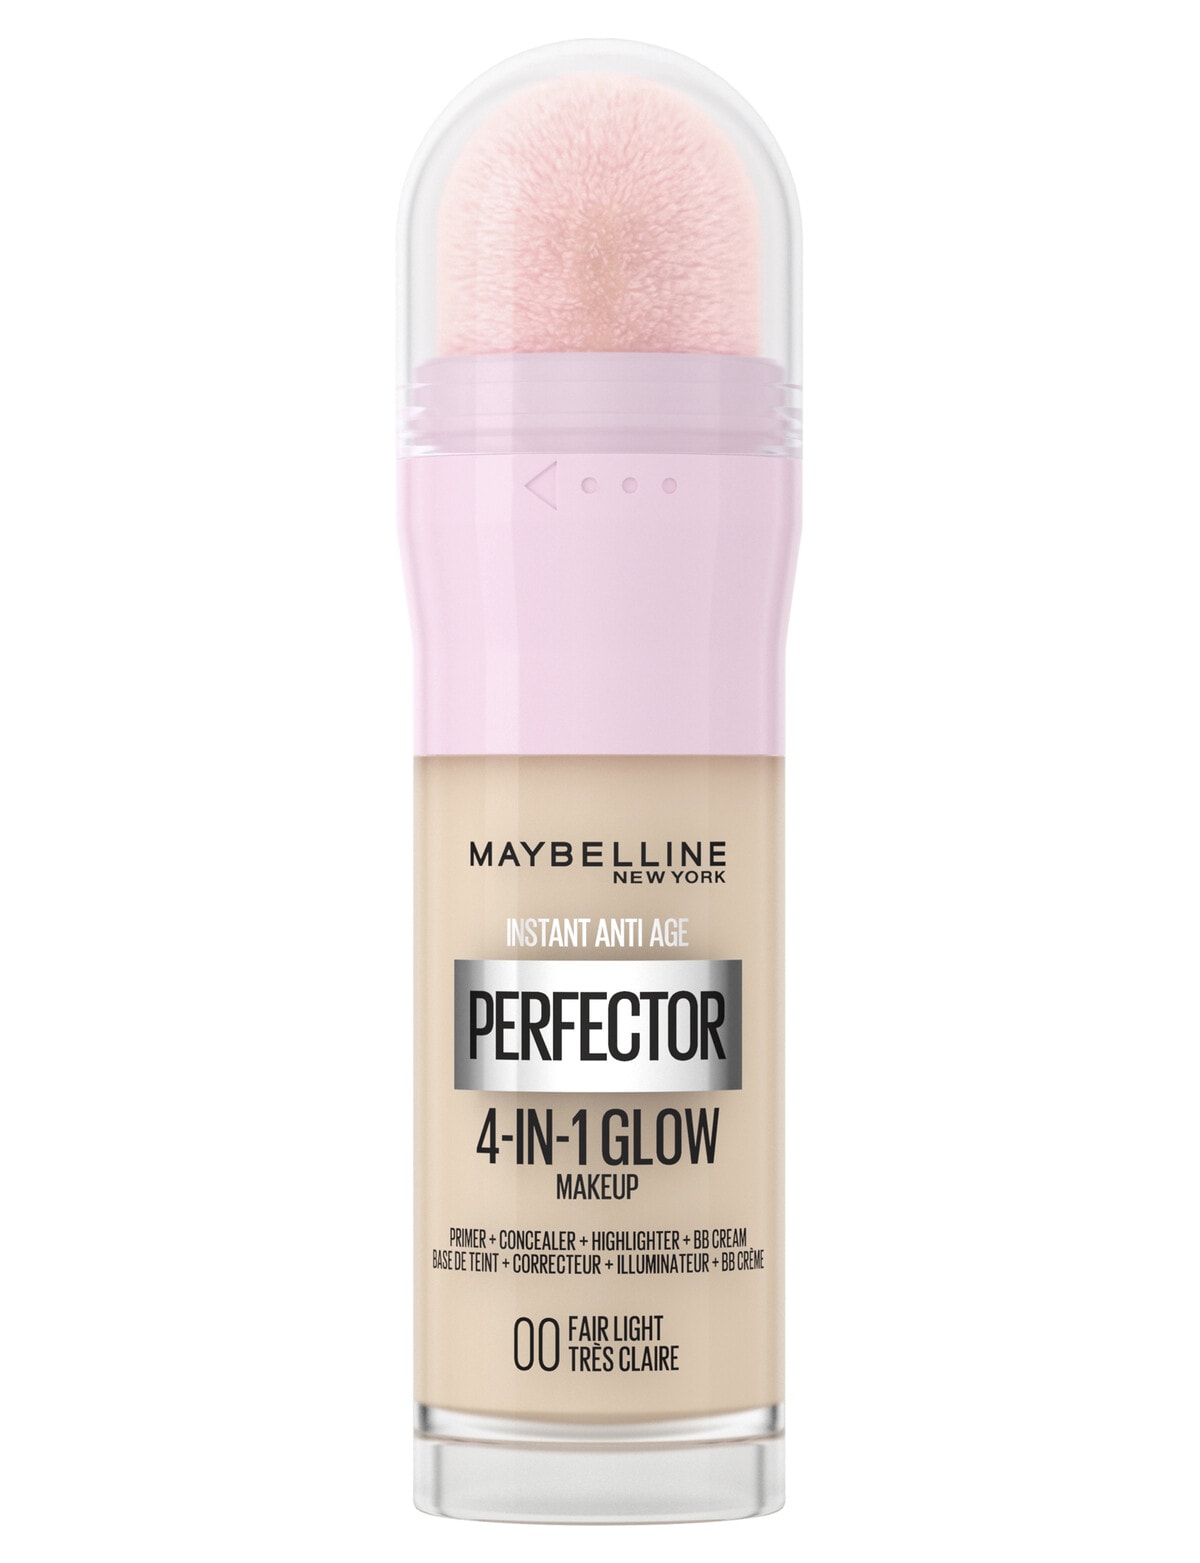 Face Perfector Maybelline Glow Makeup Instant Instant Age Rewind - 4-In-1